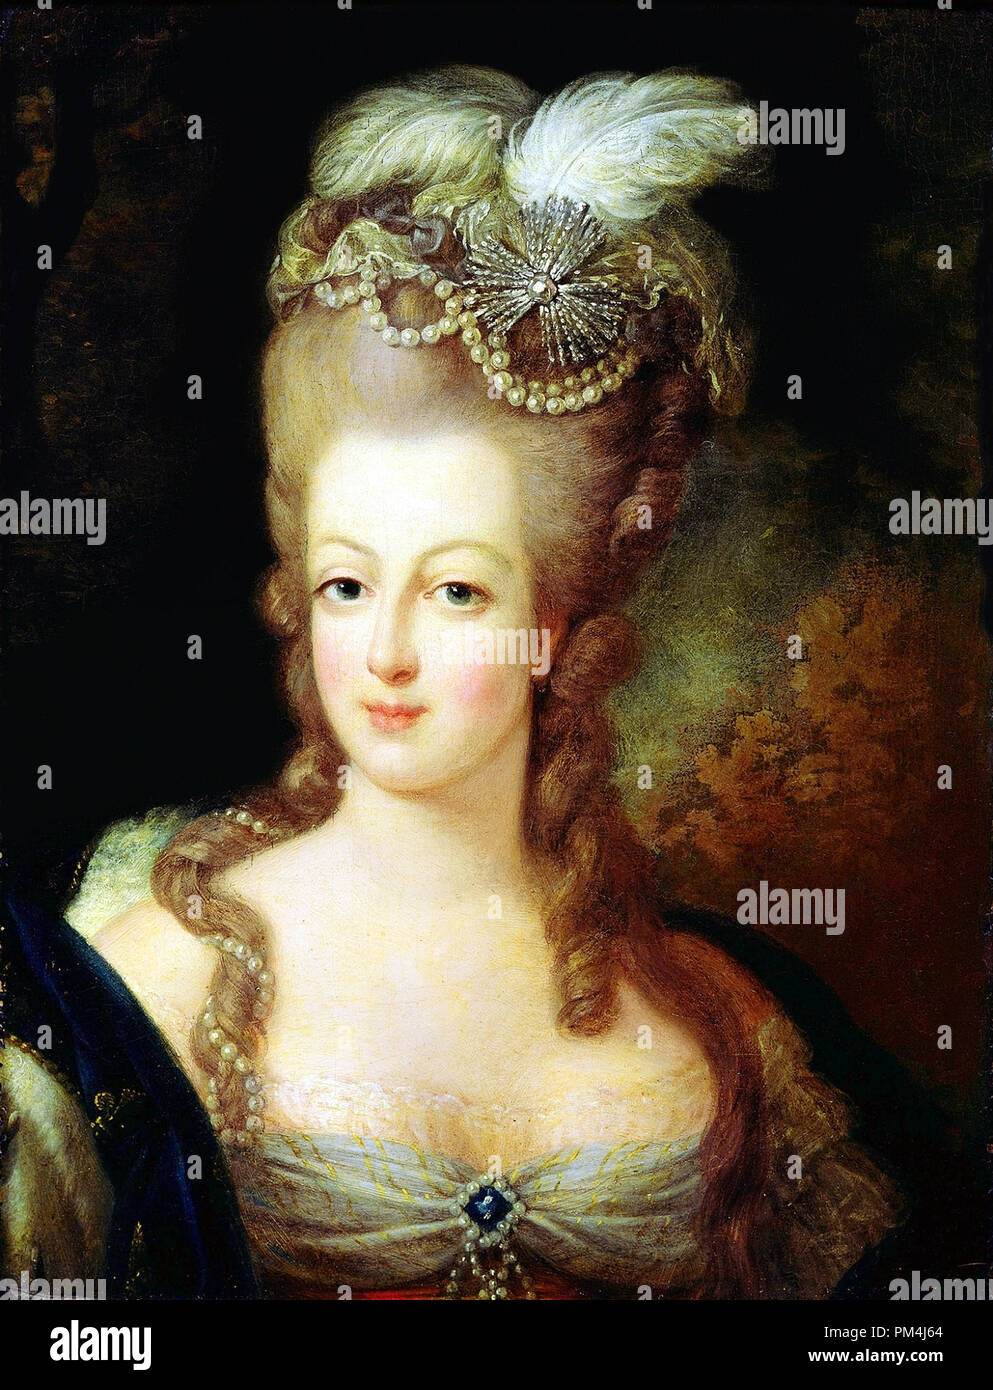 Portrait of Marie Antoinette (1755-1793) attributed to Jean-Baptiste Gautier Dagoty. Painting current location Musée Antoine-Lécuyer in Saint-Quentin, France   File Reference # 1003 552THA Stock Photo